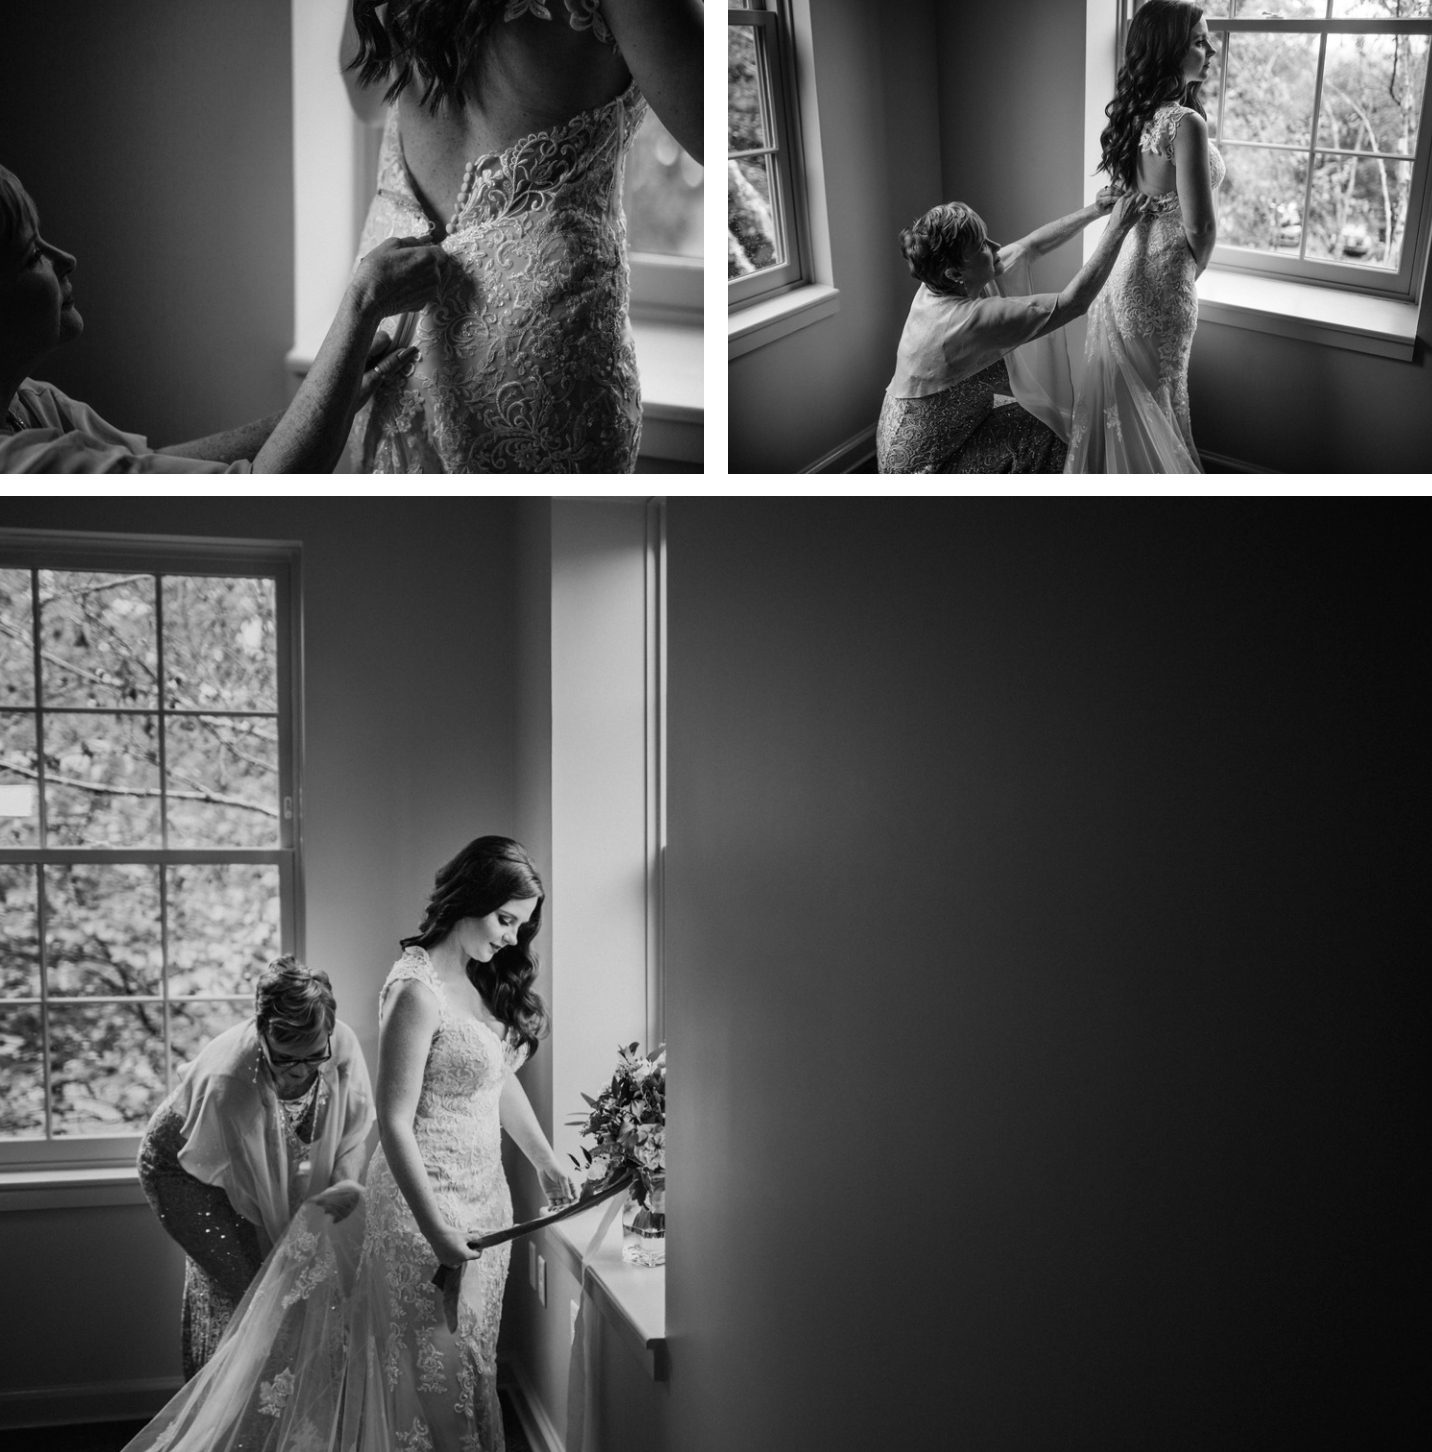 Mother of the bride helping her daughter into her wedding dress at Cheekwood.